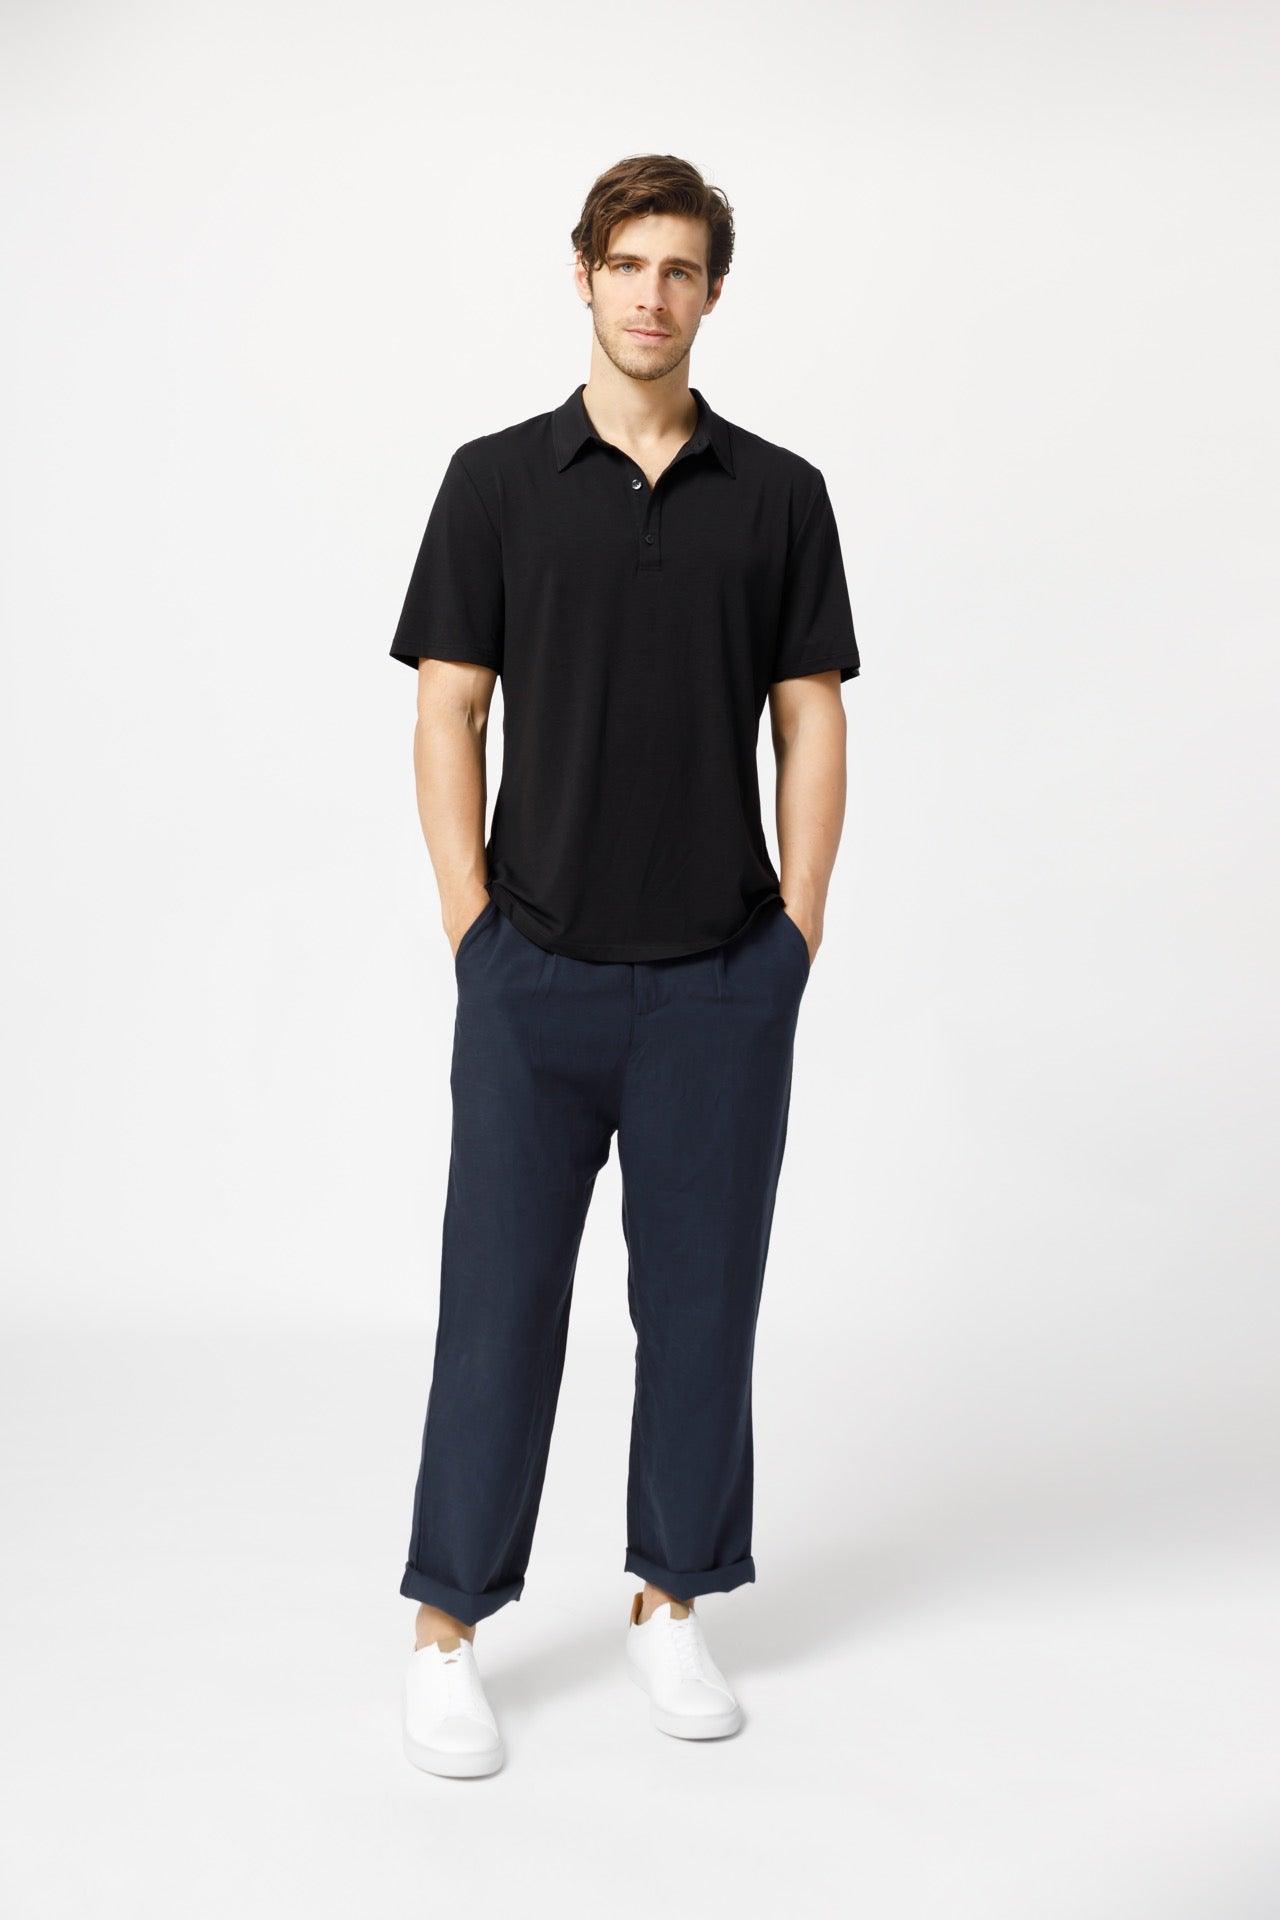 Men's Sustainable Polo Shirt - NOT LABELED